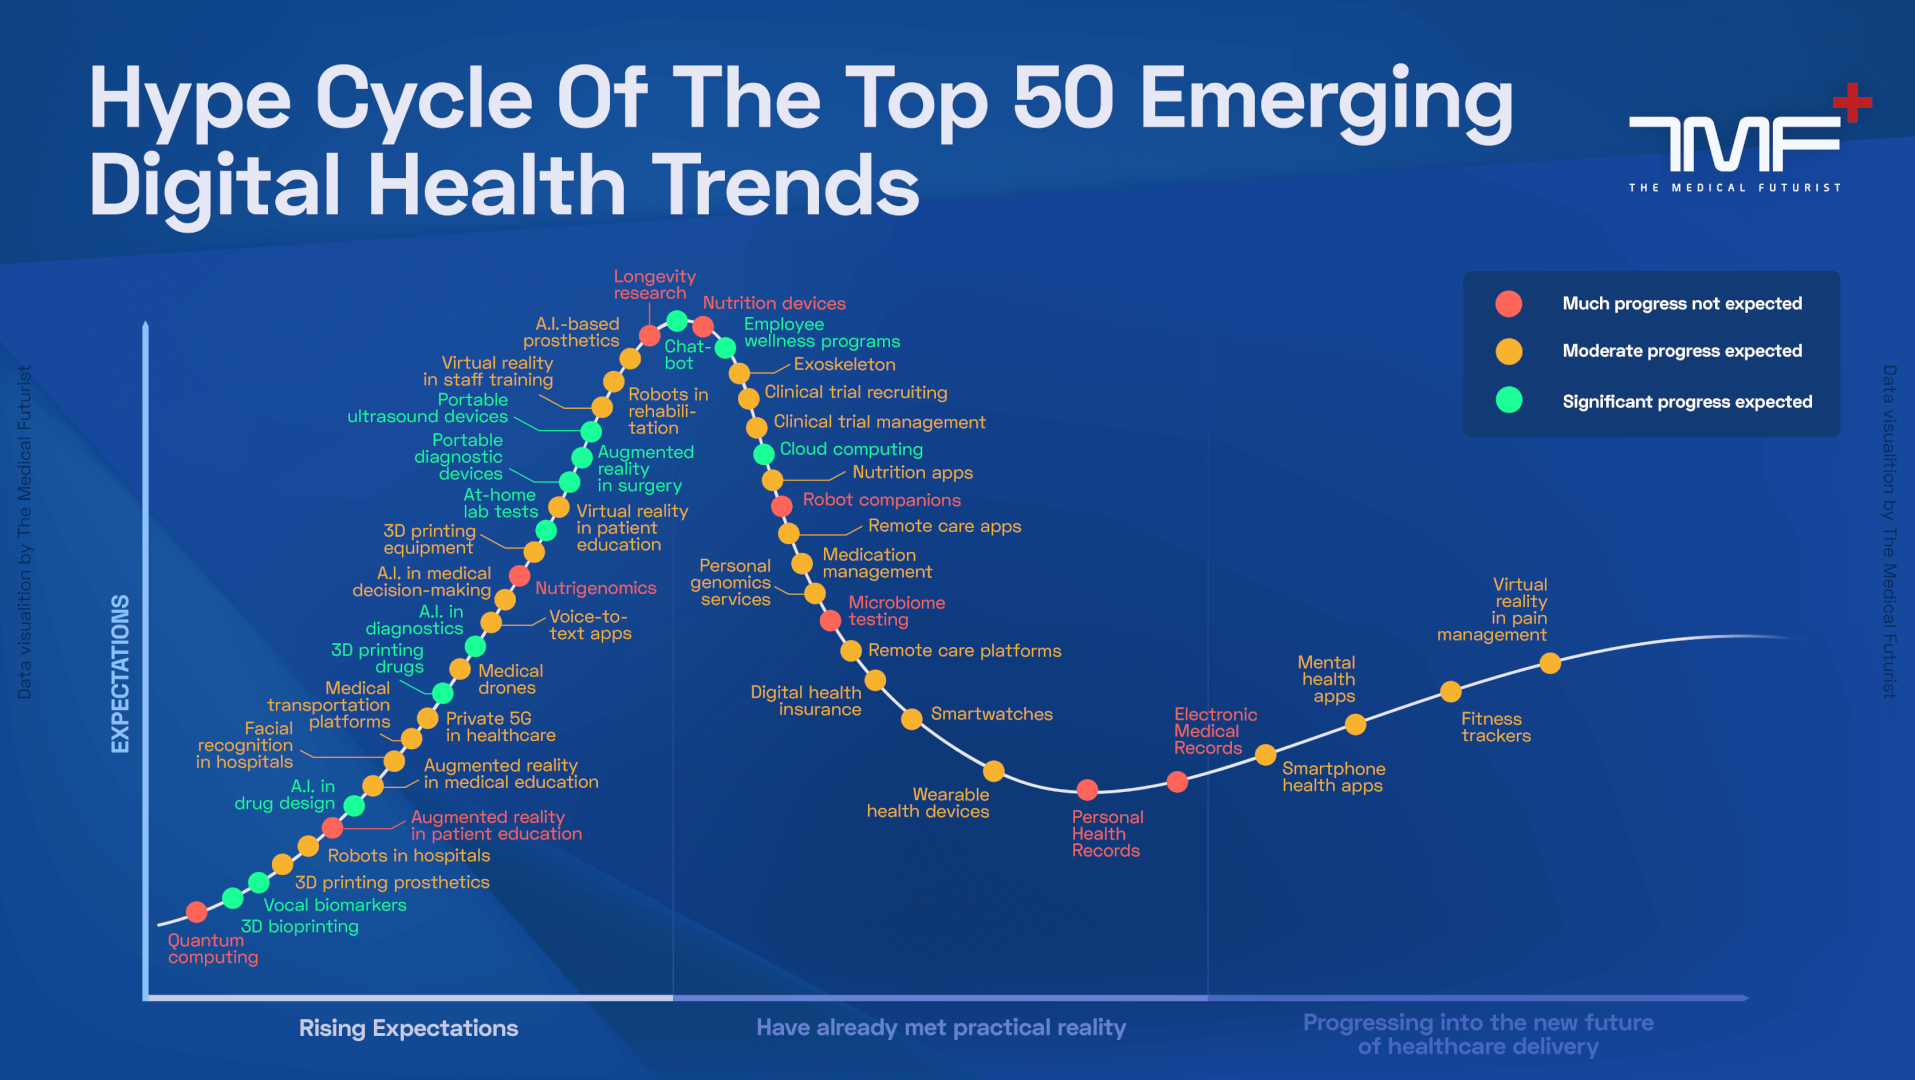 Hype Cycle Of The Top 50 Emerging Digital Health Trends The Medical Futurist